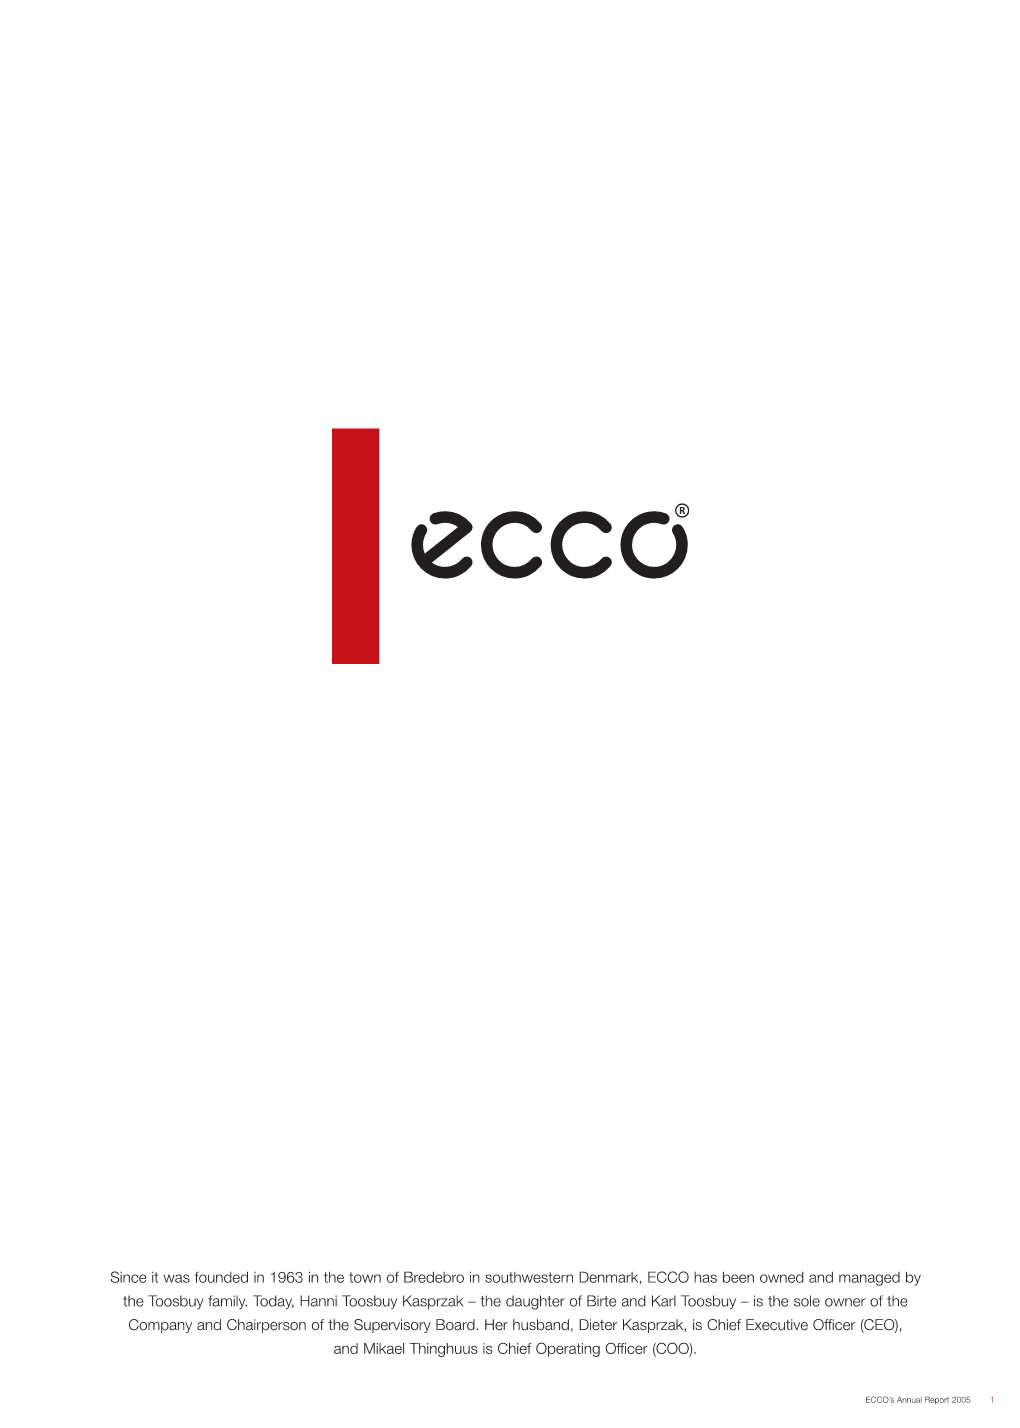 Since It Was Founded in 1963 in the Town of Bredebro in Southwestern Denmark, ECCO Has Been Owned and Managed by the Toosbuy Family